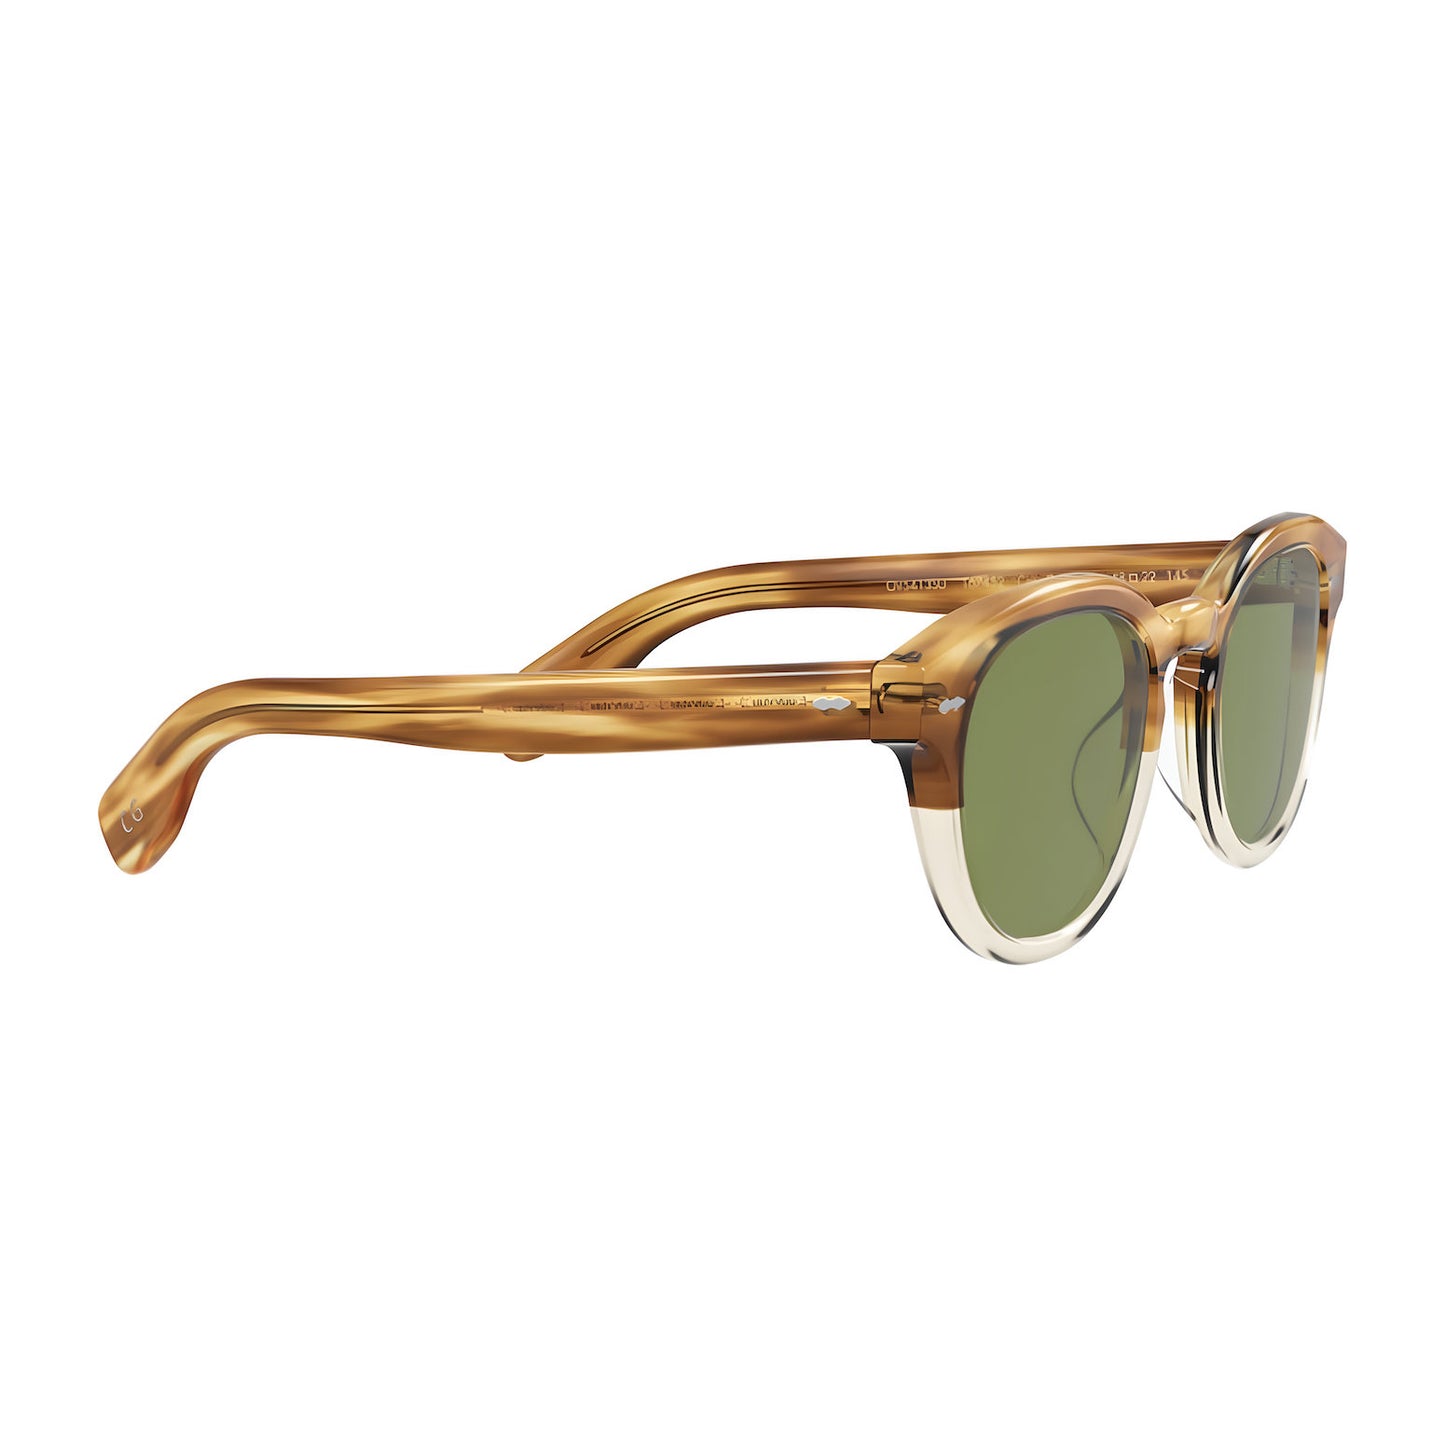 OLIVER PEOPLES CARY GRANT SUN -  HONEY VSB W/GREEN